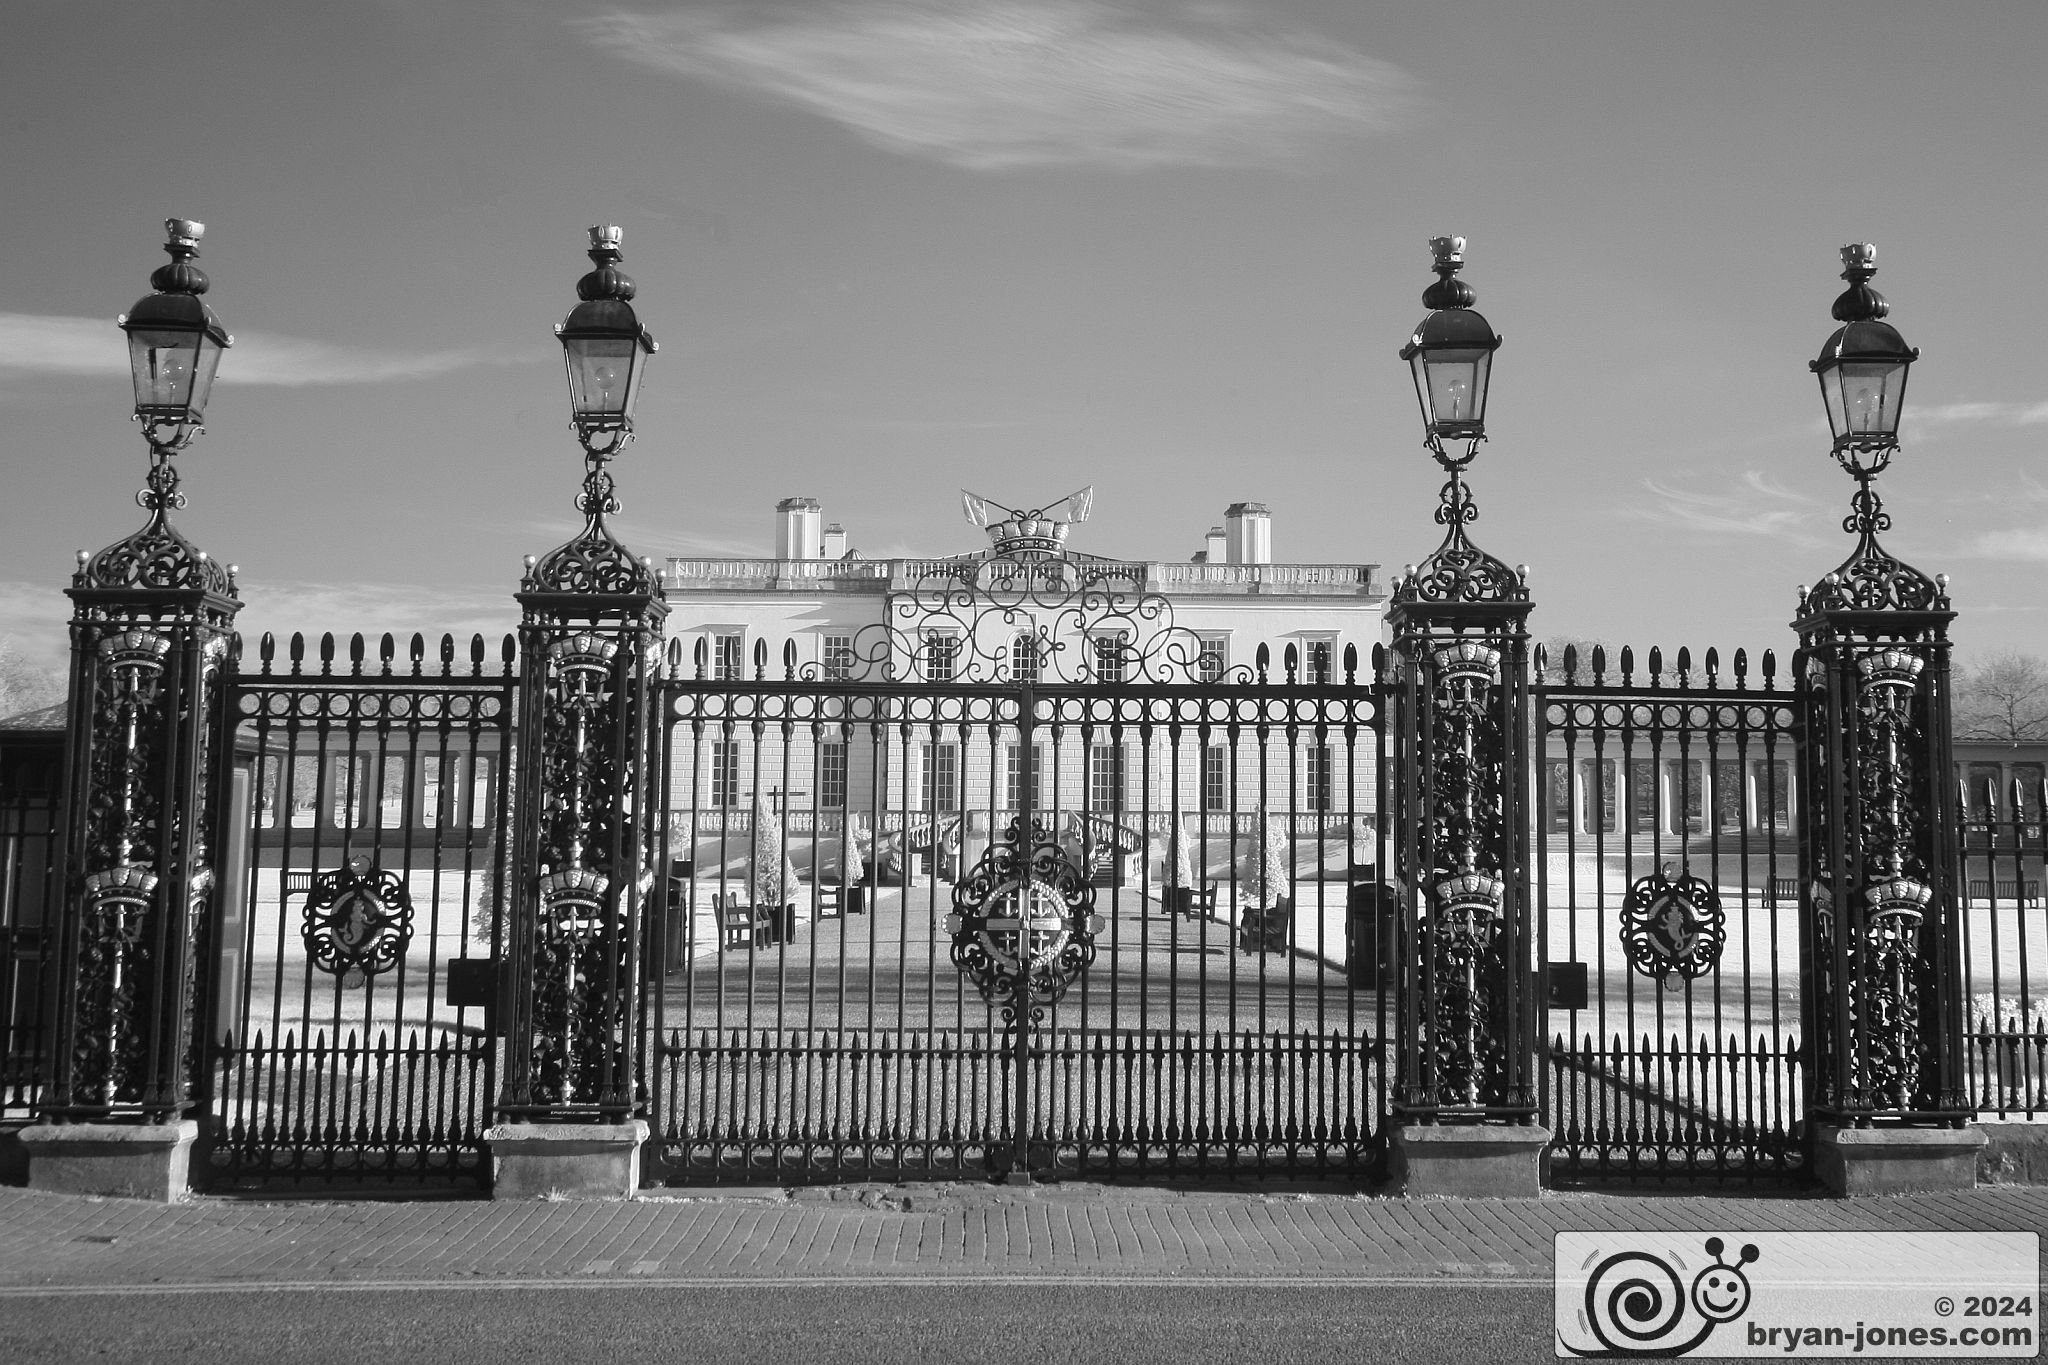 The Queen's House, Greenwich, London, 22-Mar-2021